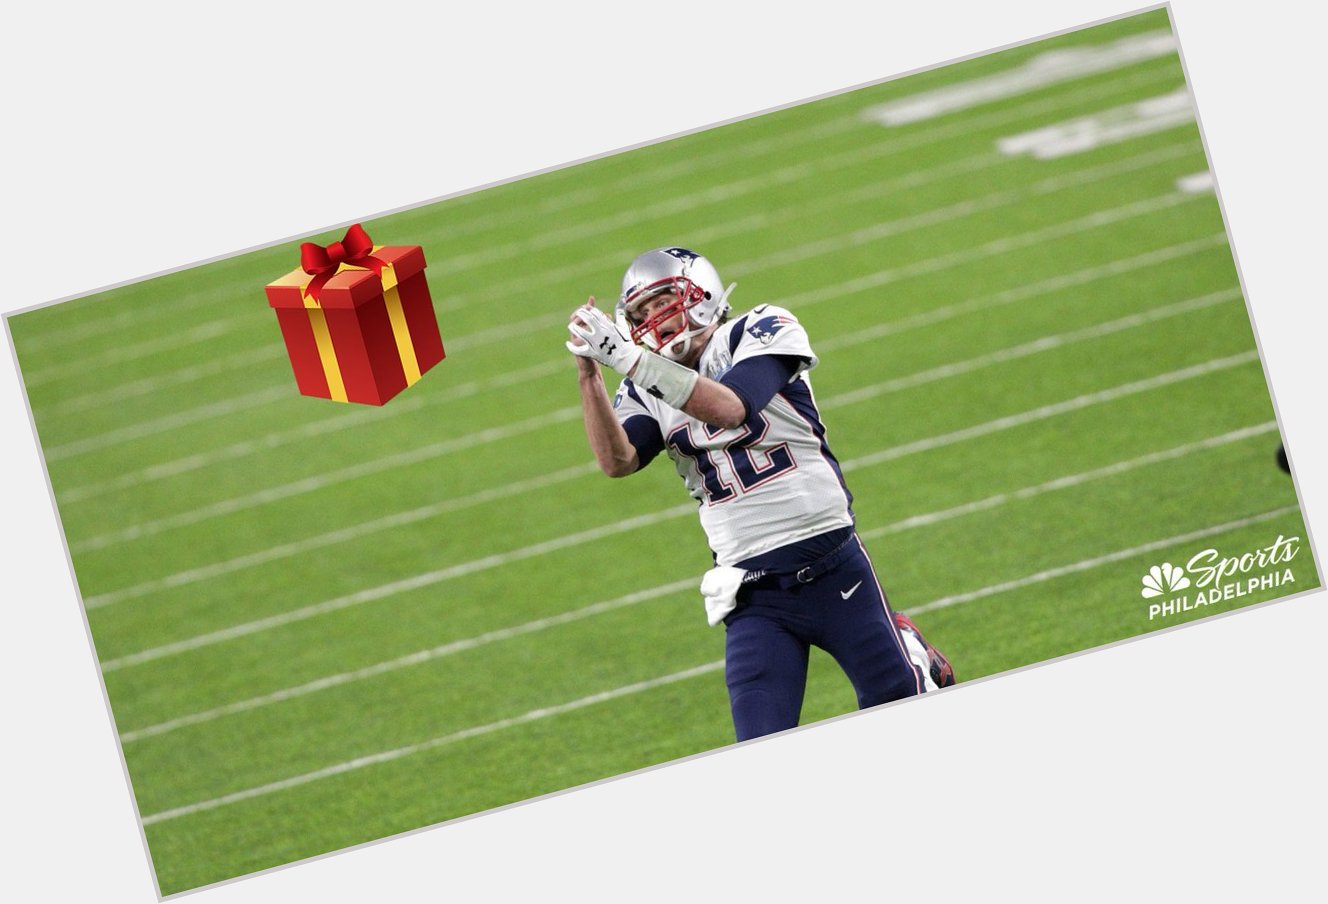 Happy birthday Tom Brady!

If you get him a gift, make sure you hand it to him. 